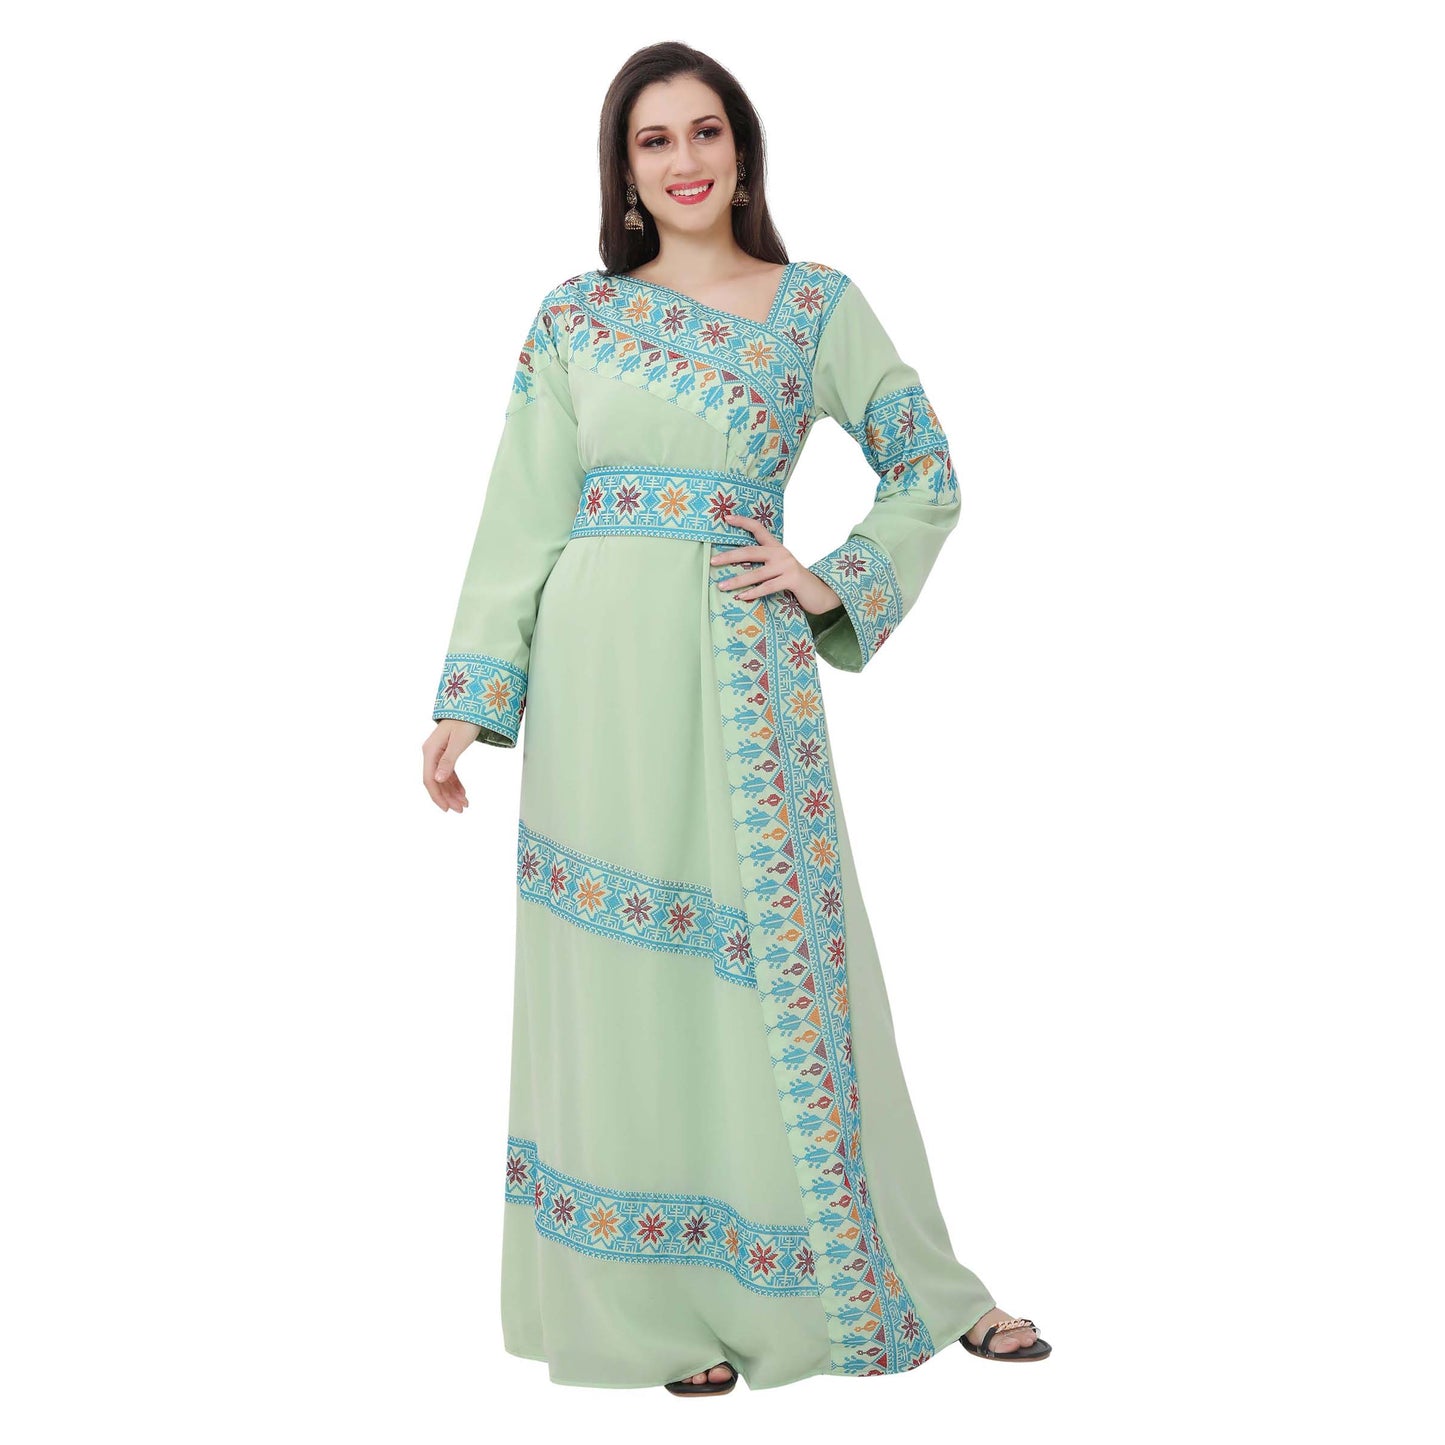 Designer Palestine Thobe Caftan with Colorful Cross Stitch Embroidery ...